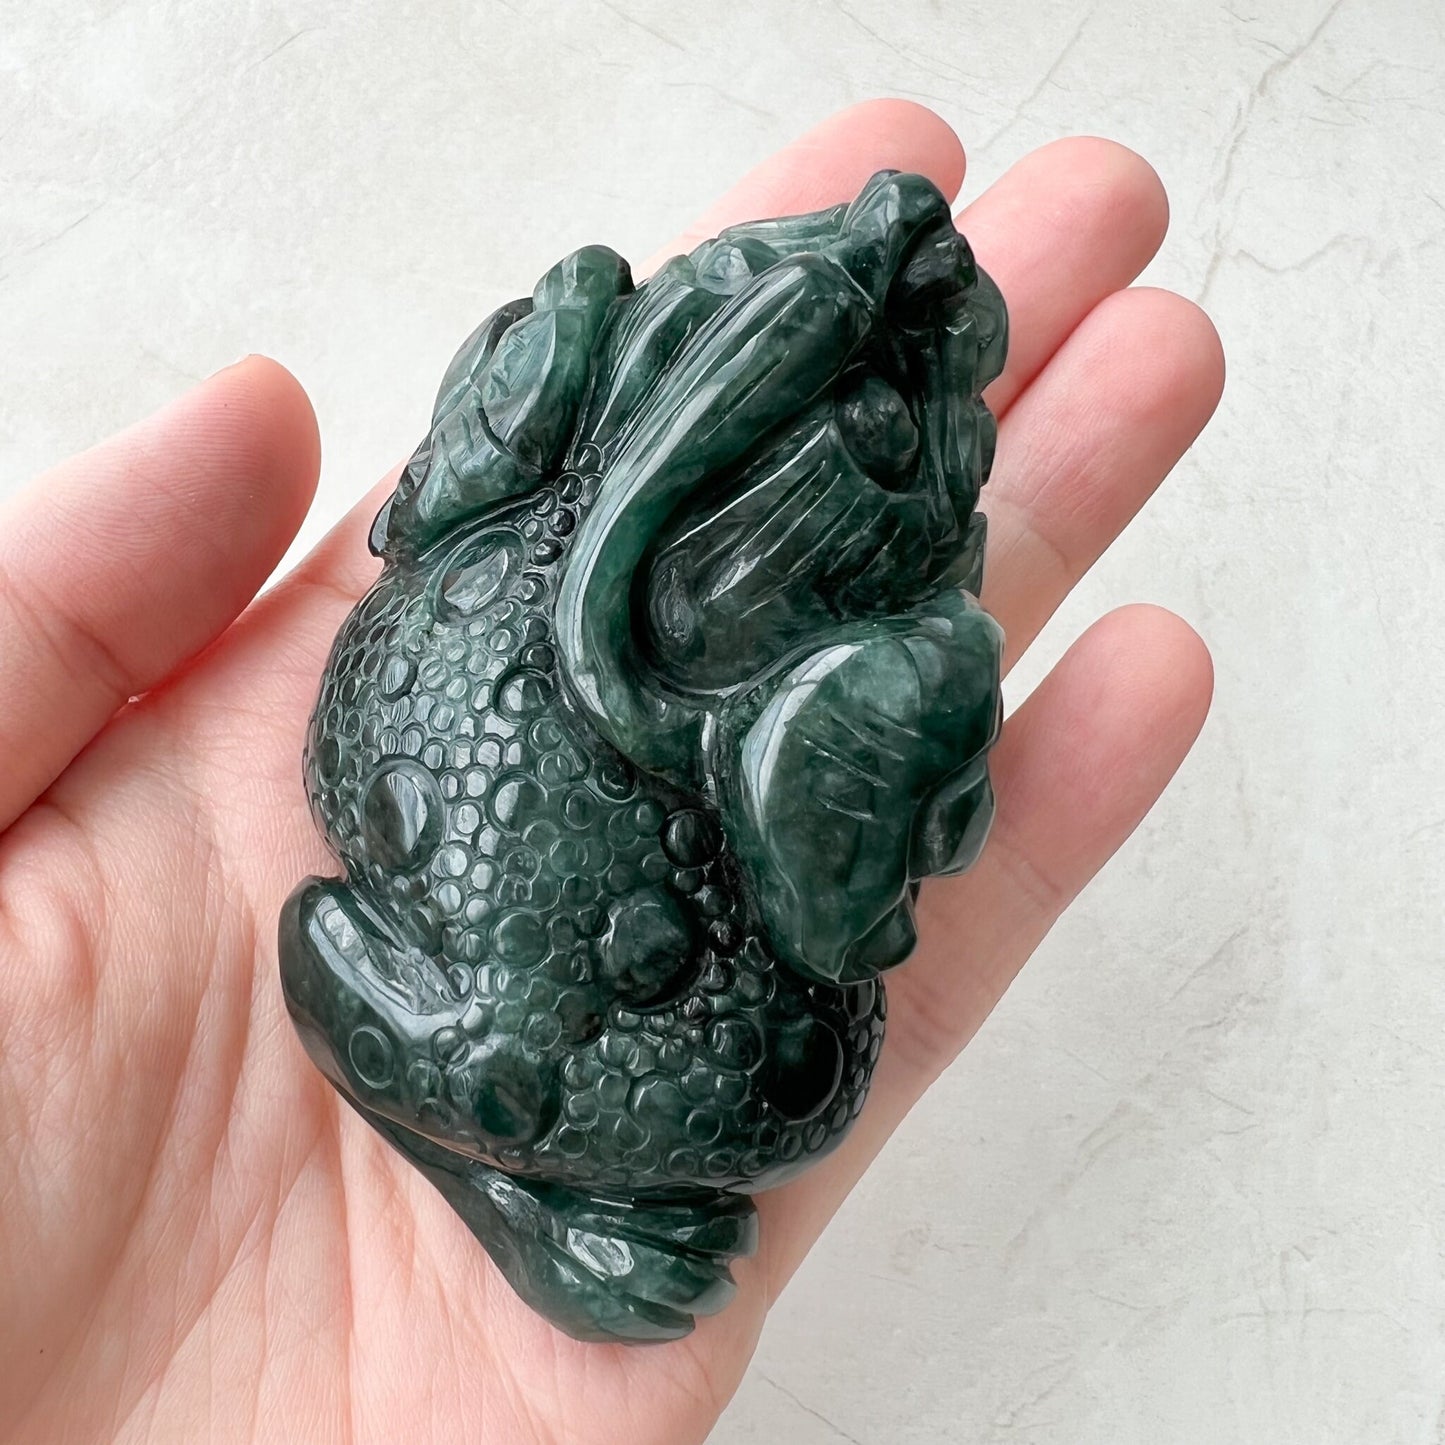 Jadeite Jade Blue-Green Money Toad, Money Frog, Golden Toad, 3 Leg Toad, Jin Chan, Lucky Toad, Feng Shui Carved Figurine, YJ-1221-0013828 - AriaDesignCollection